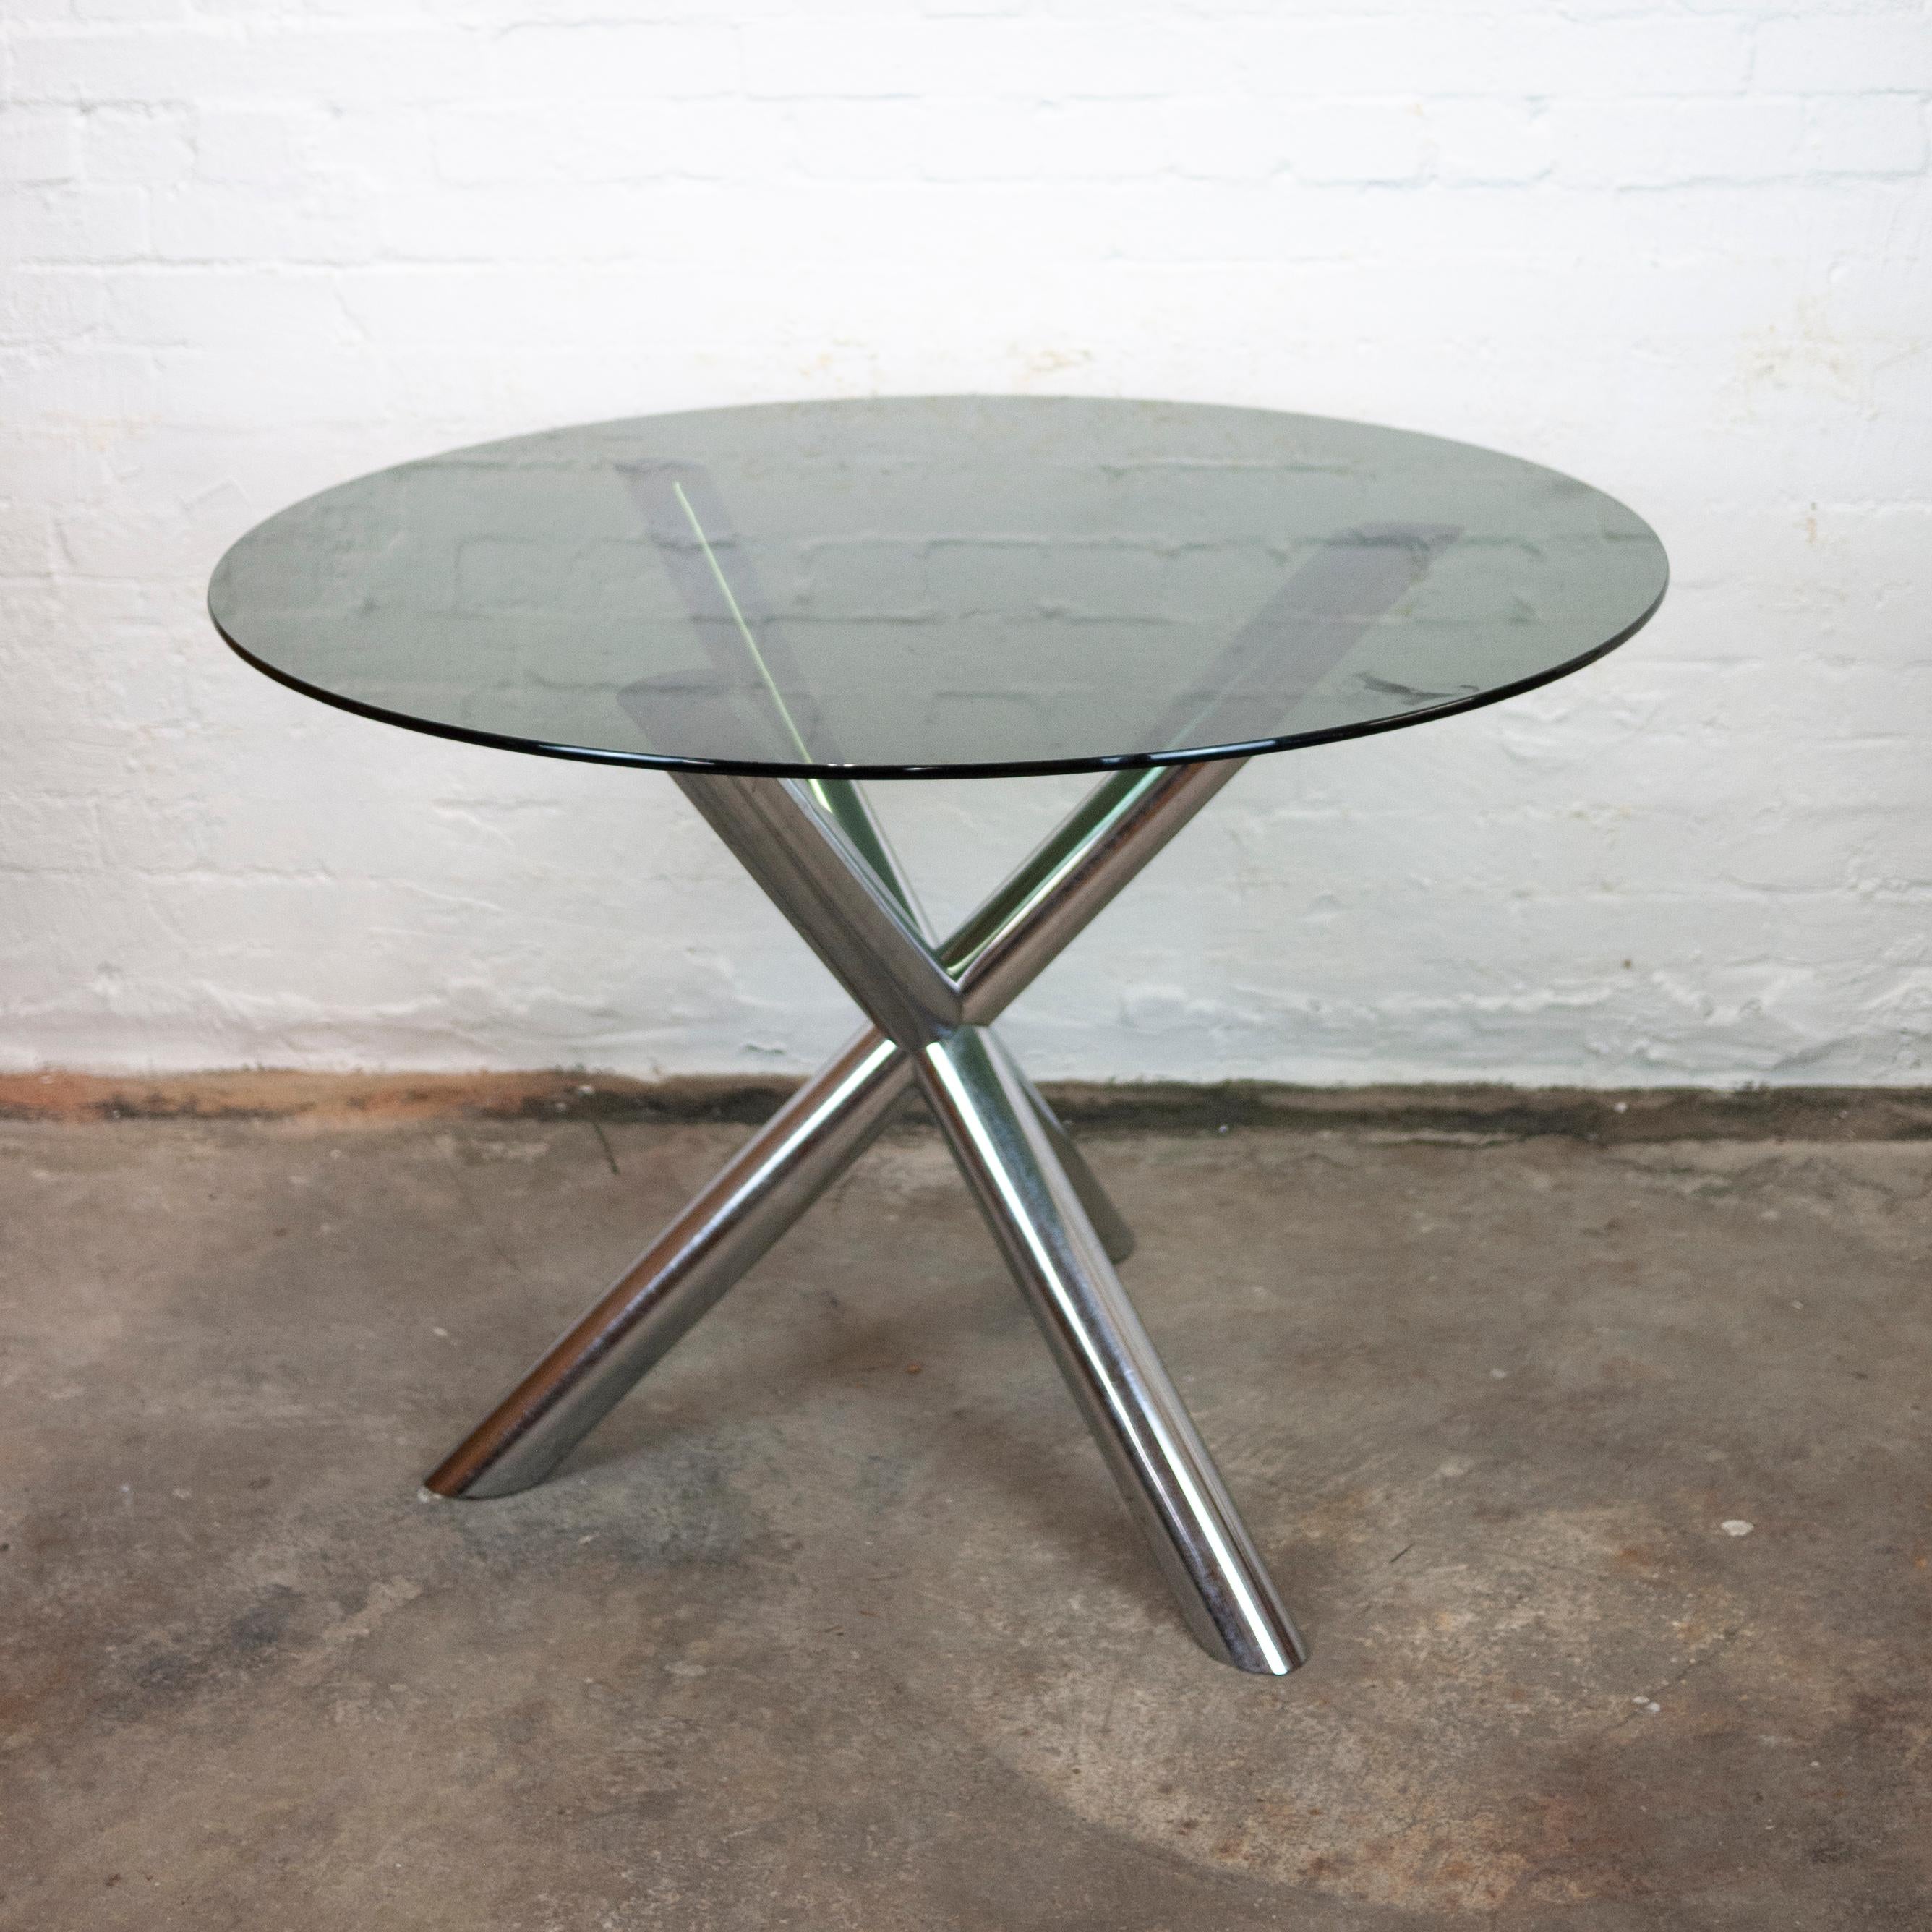 French Vintage Tripod Dining Table by Renato Zevi for Roche Bobois, 1970